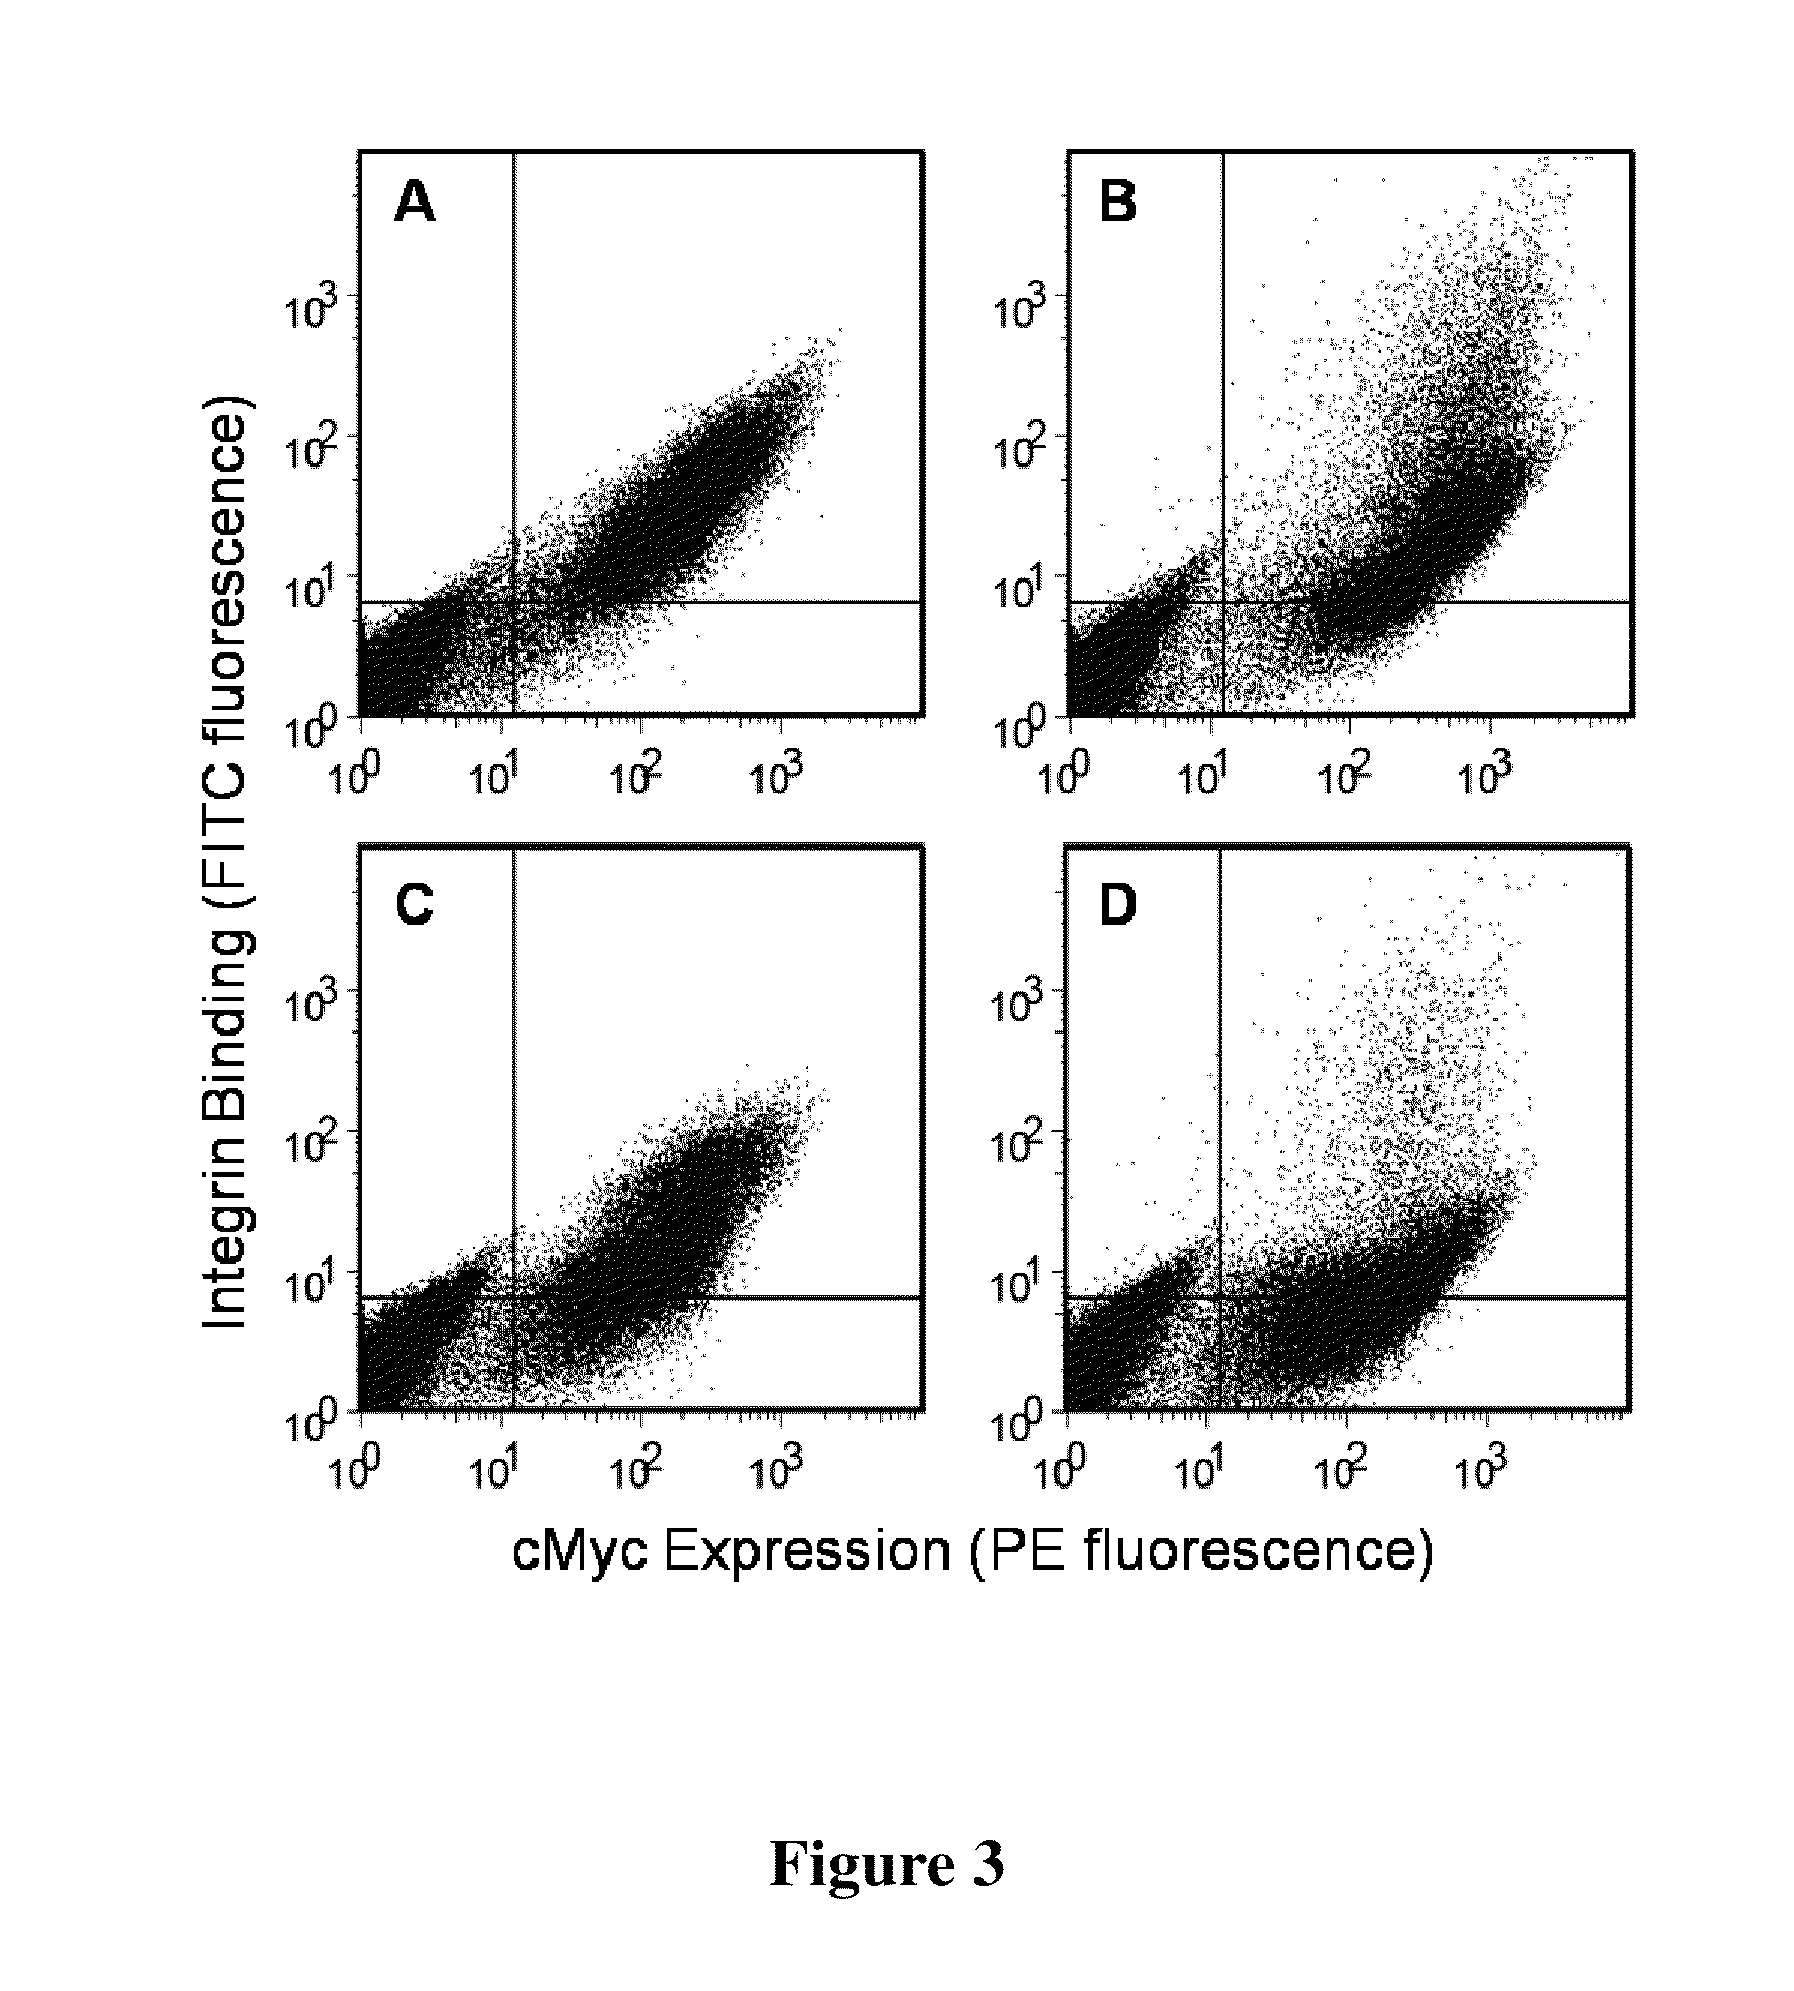 Cystine knot peptides binding to alpha IIb beta 3 integrins and methods of use